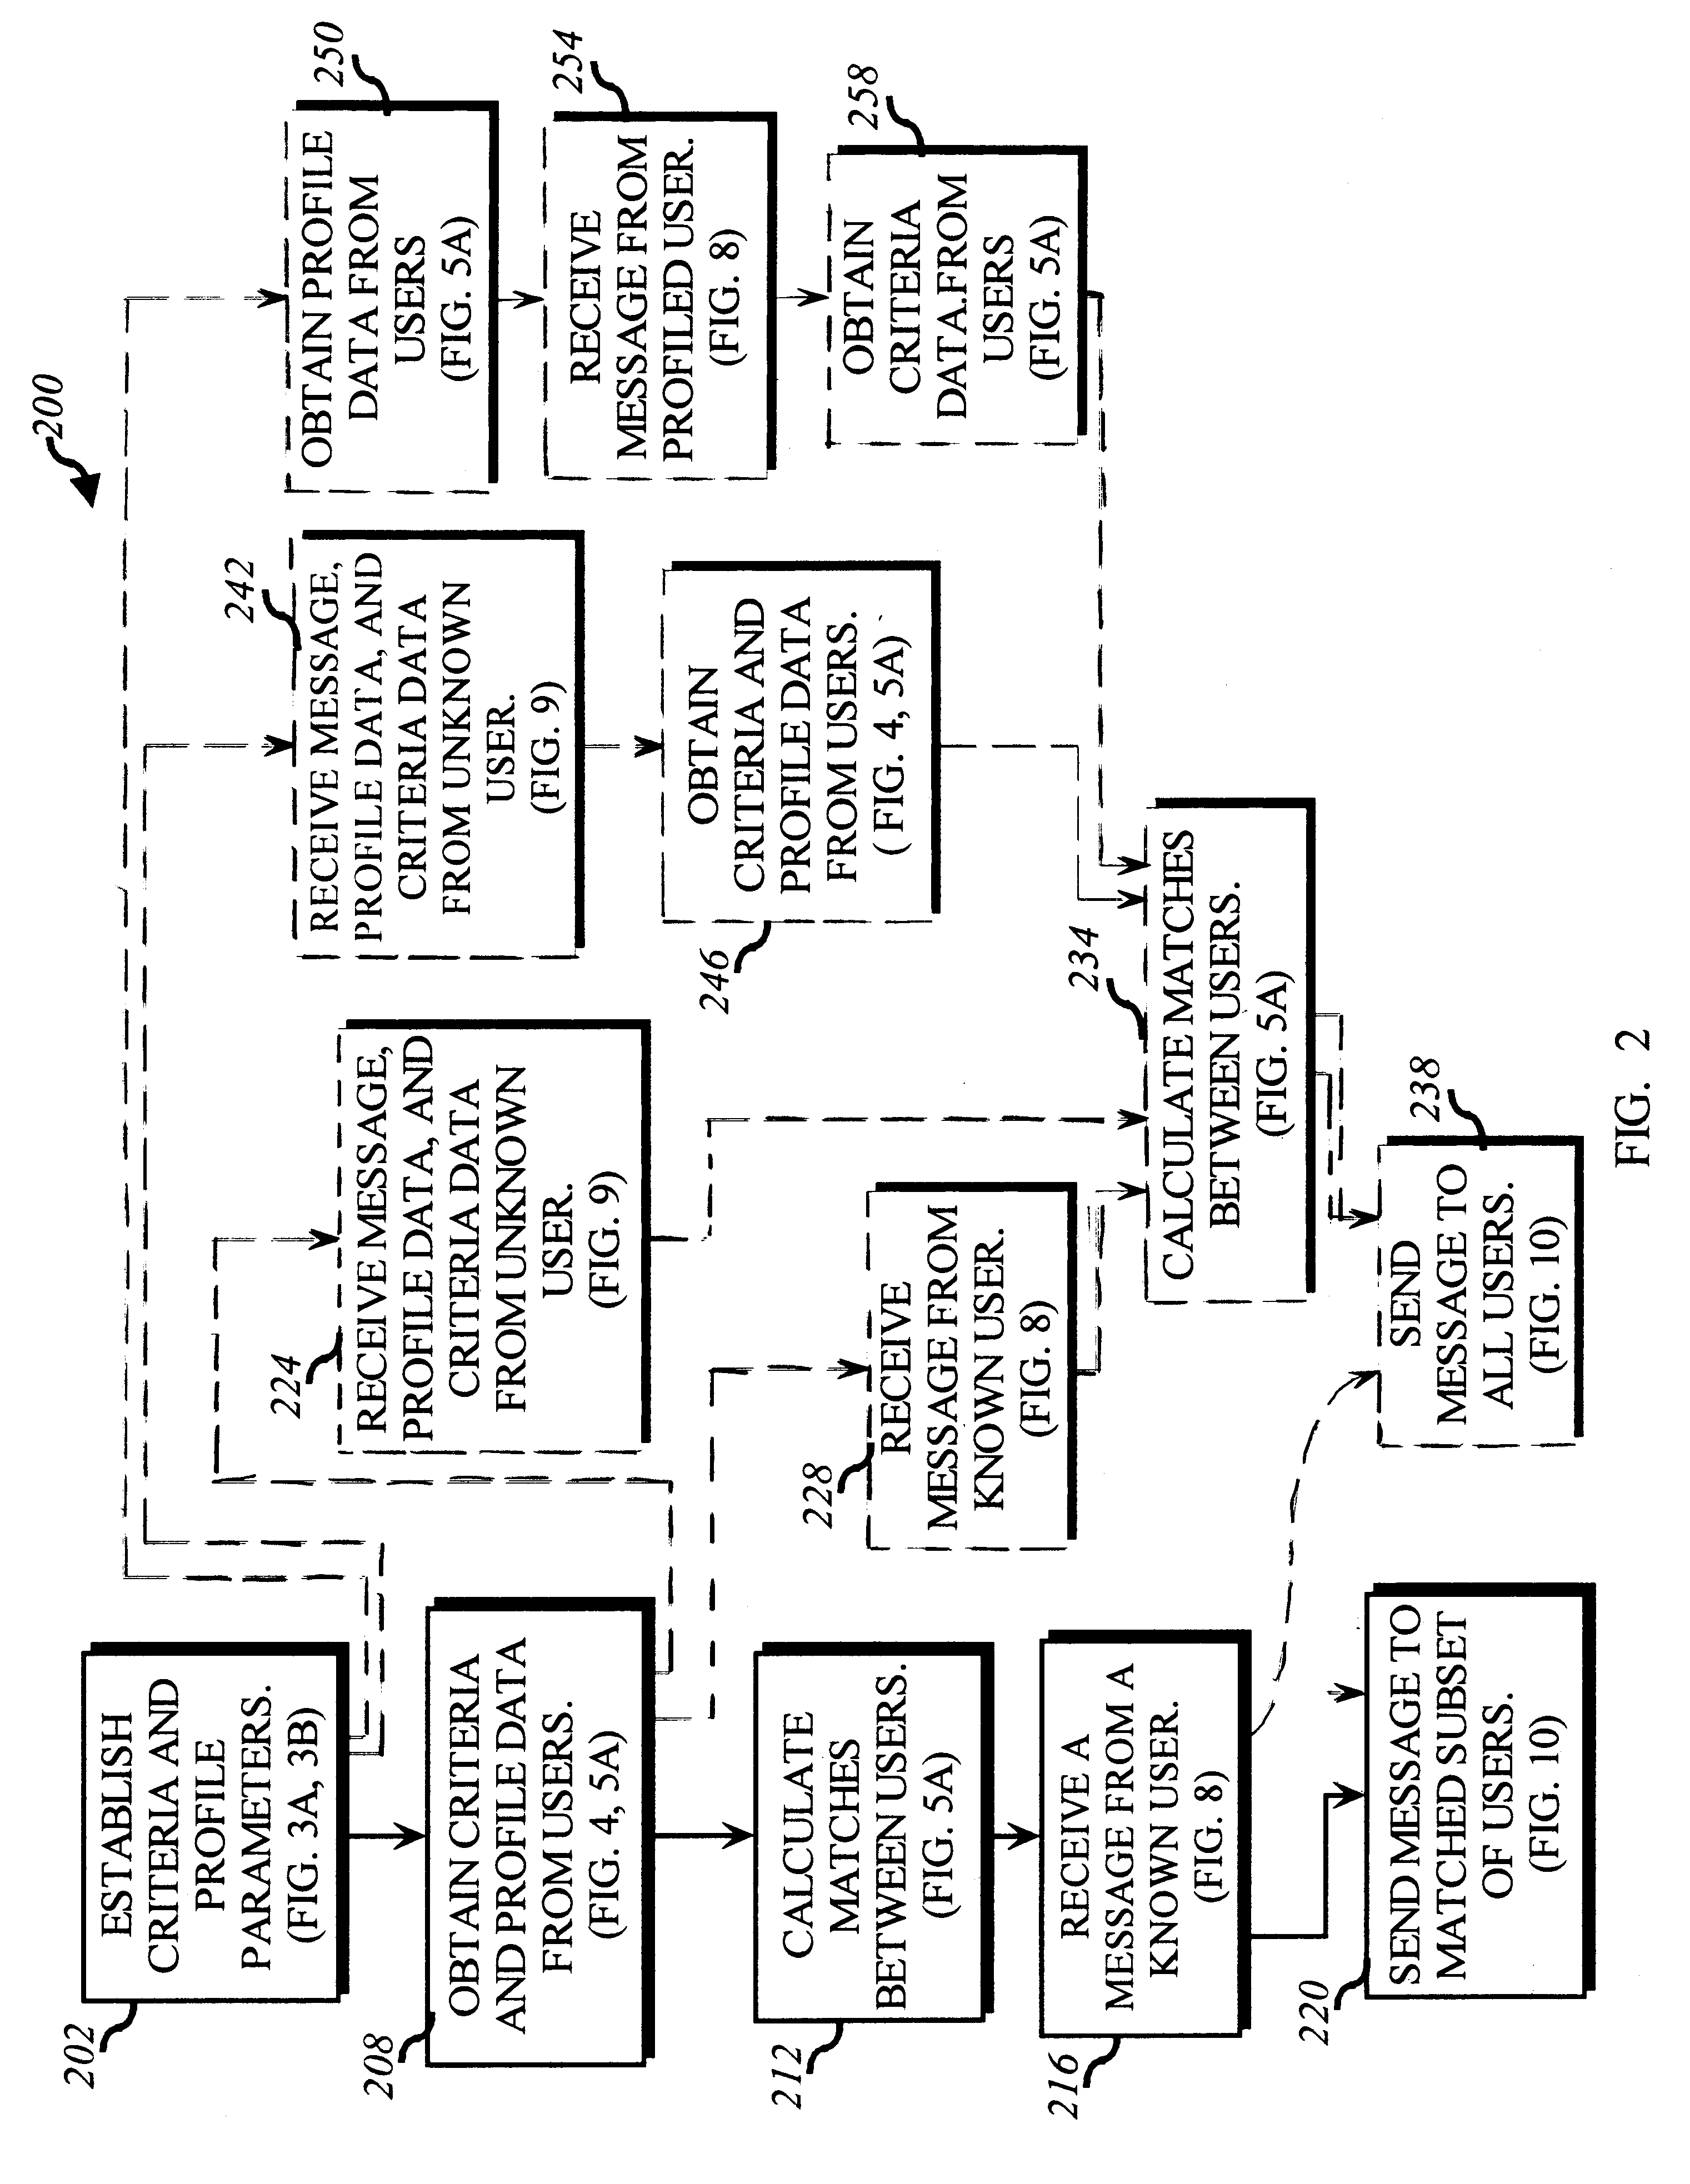 Dynamically matching users for group communications based on a threshold degree of matching of sender and recipient predetermined acceptance criteria